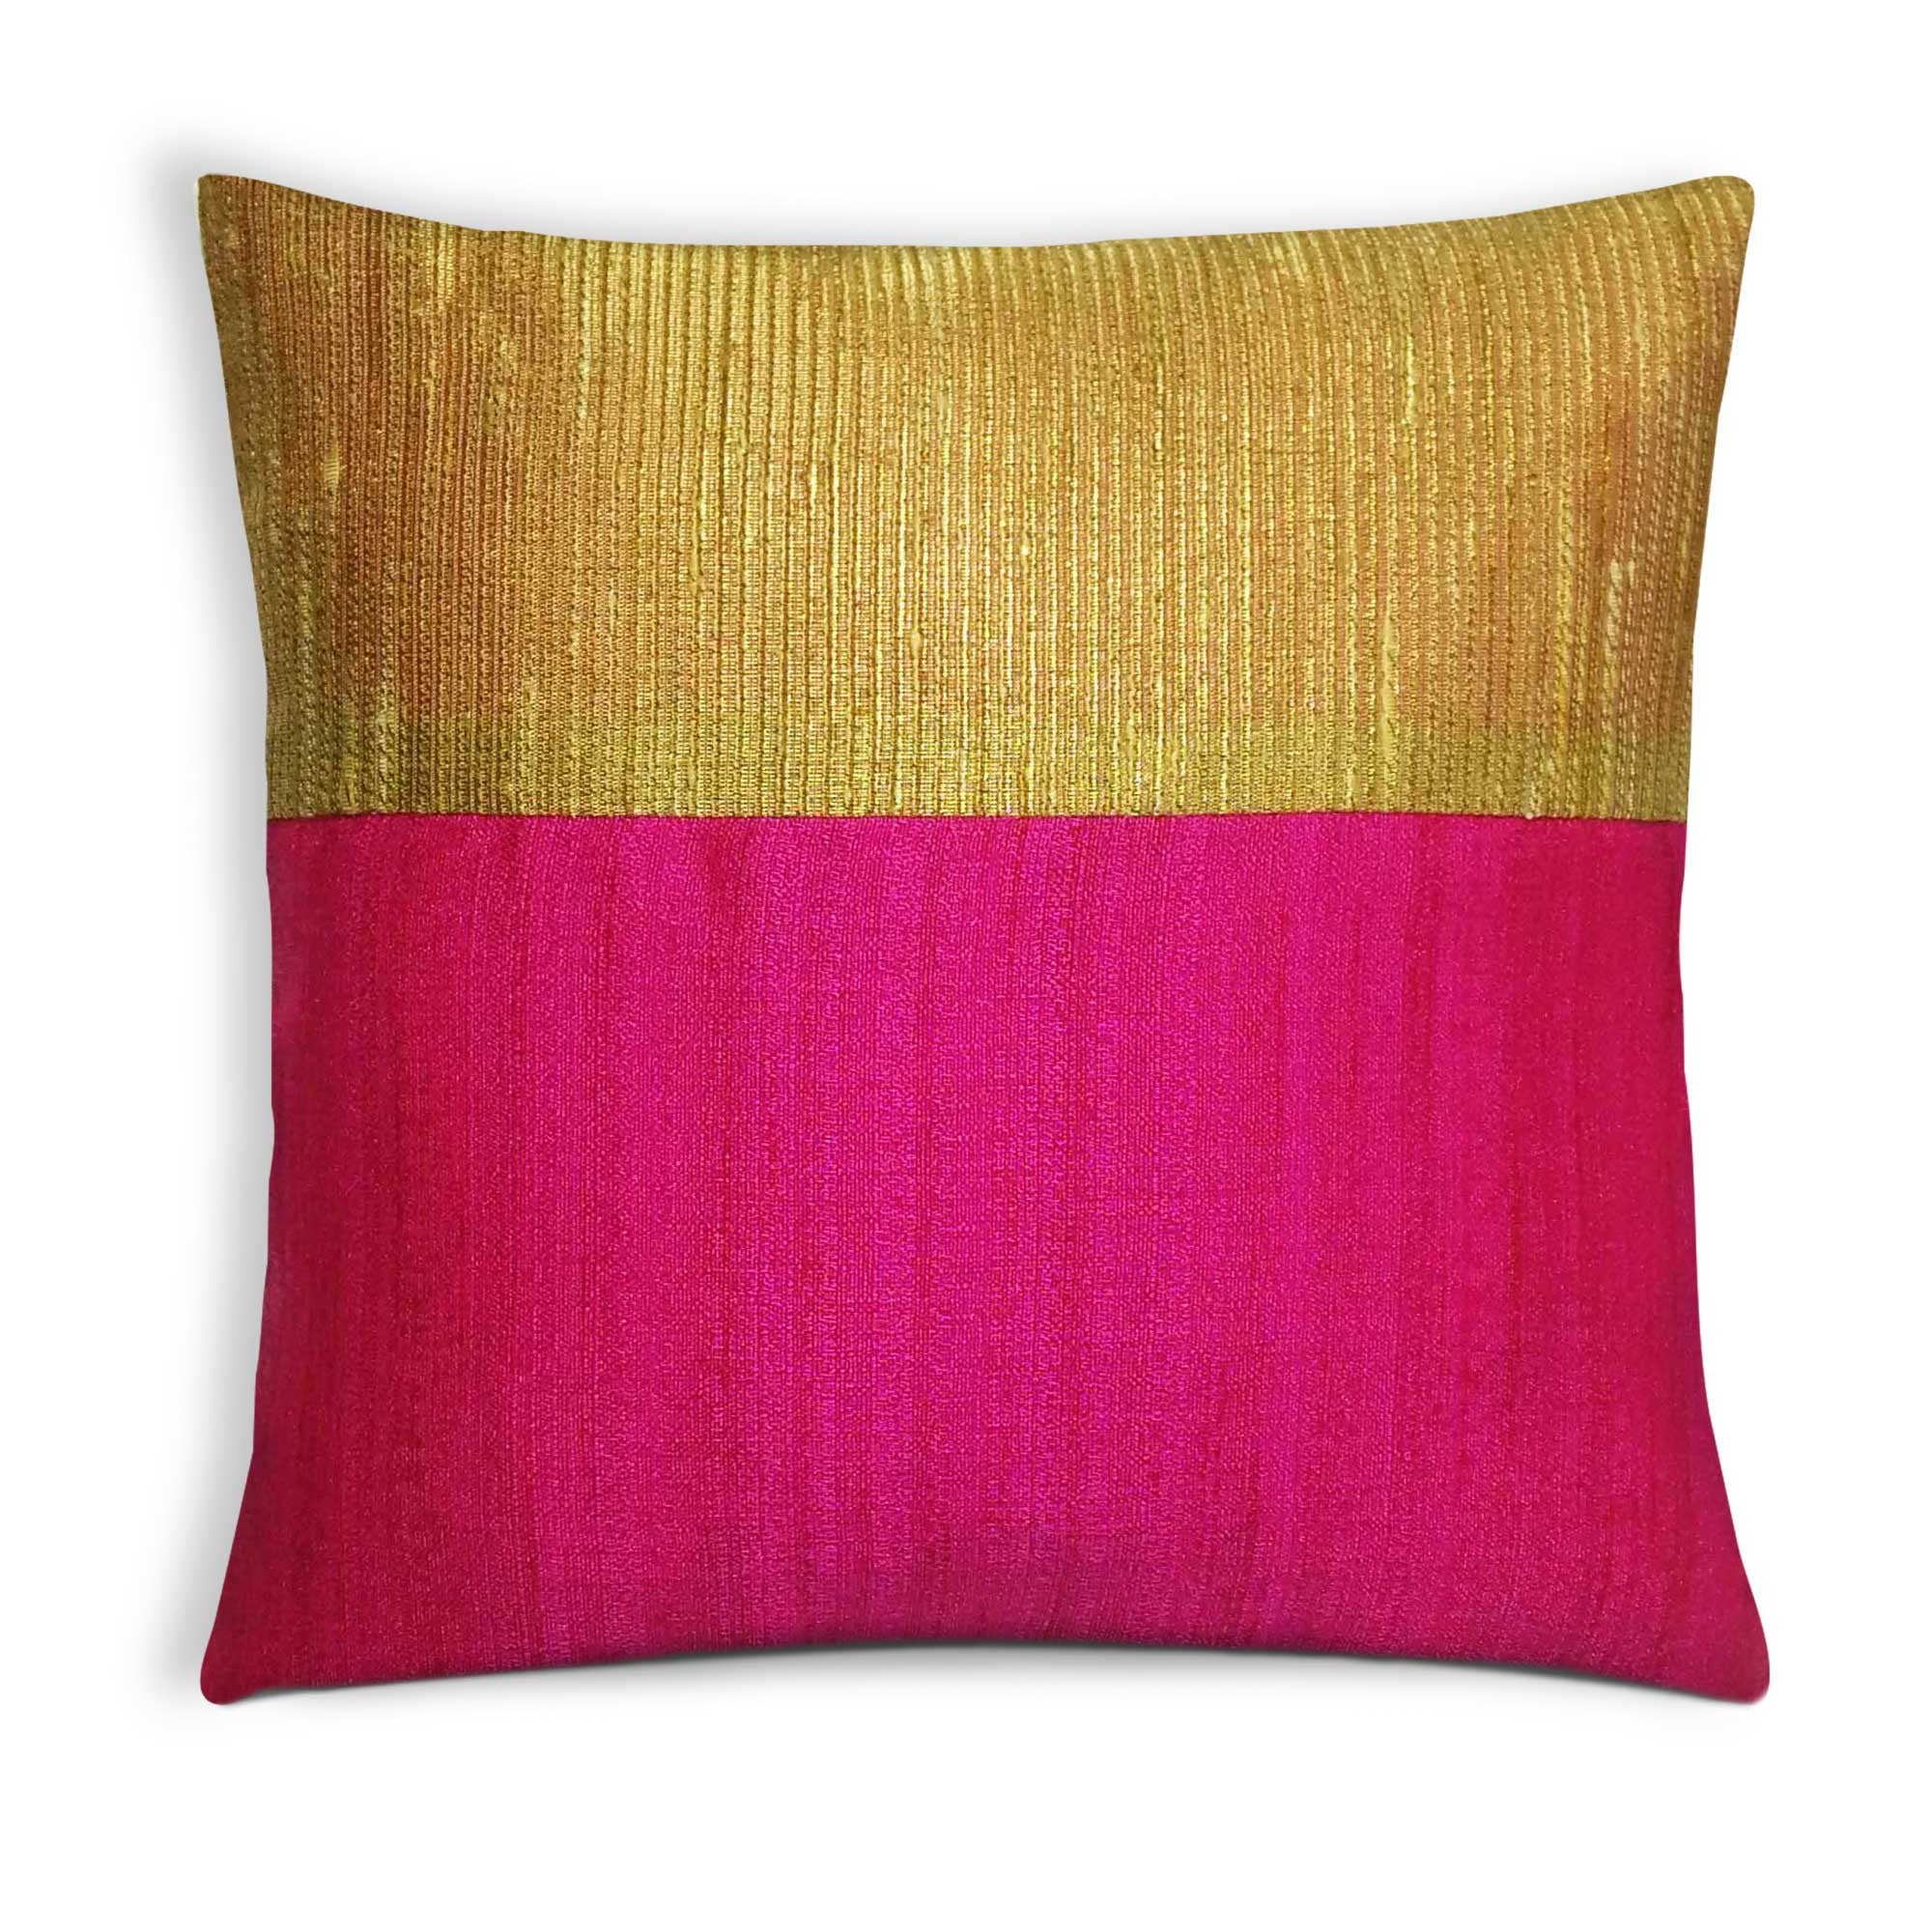 Hot Pink and Gold Silk Pillow Cover – DesiCrafts